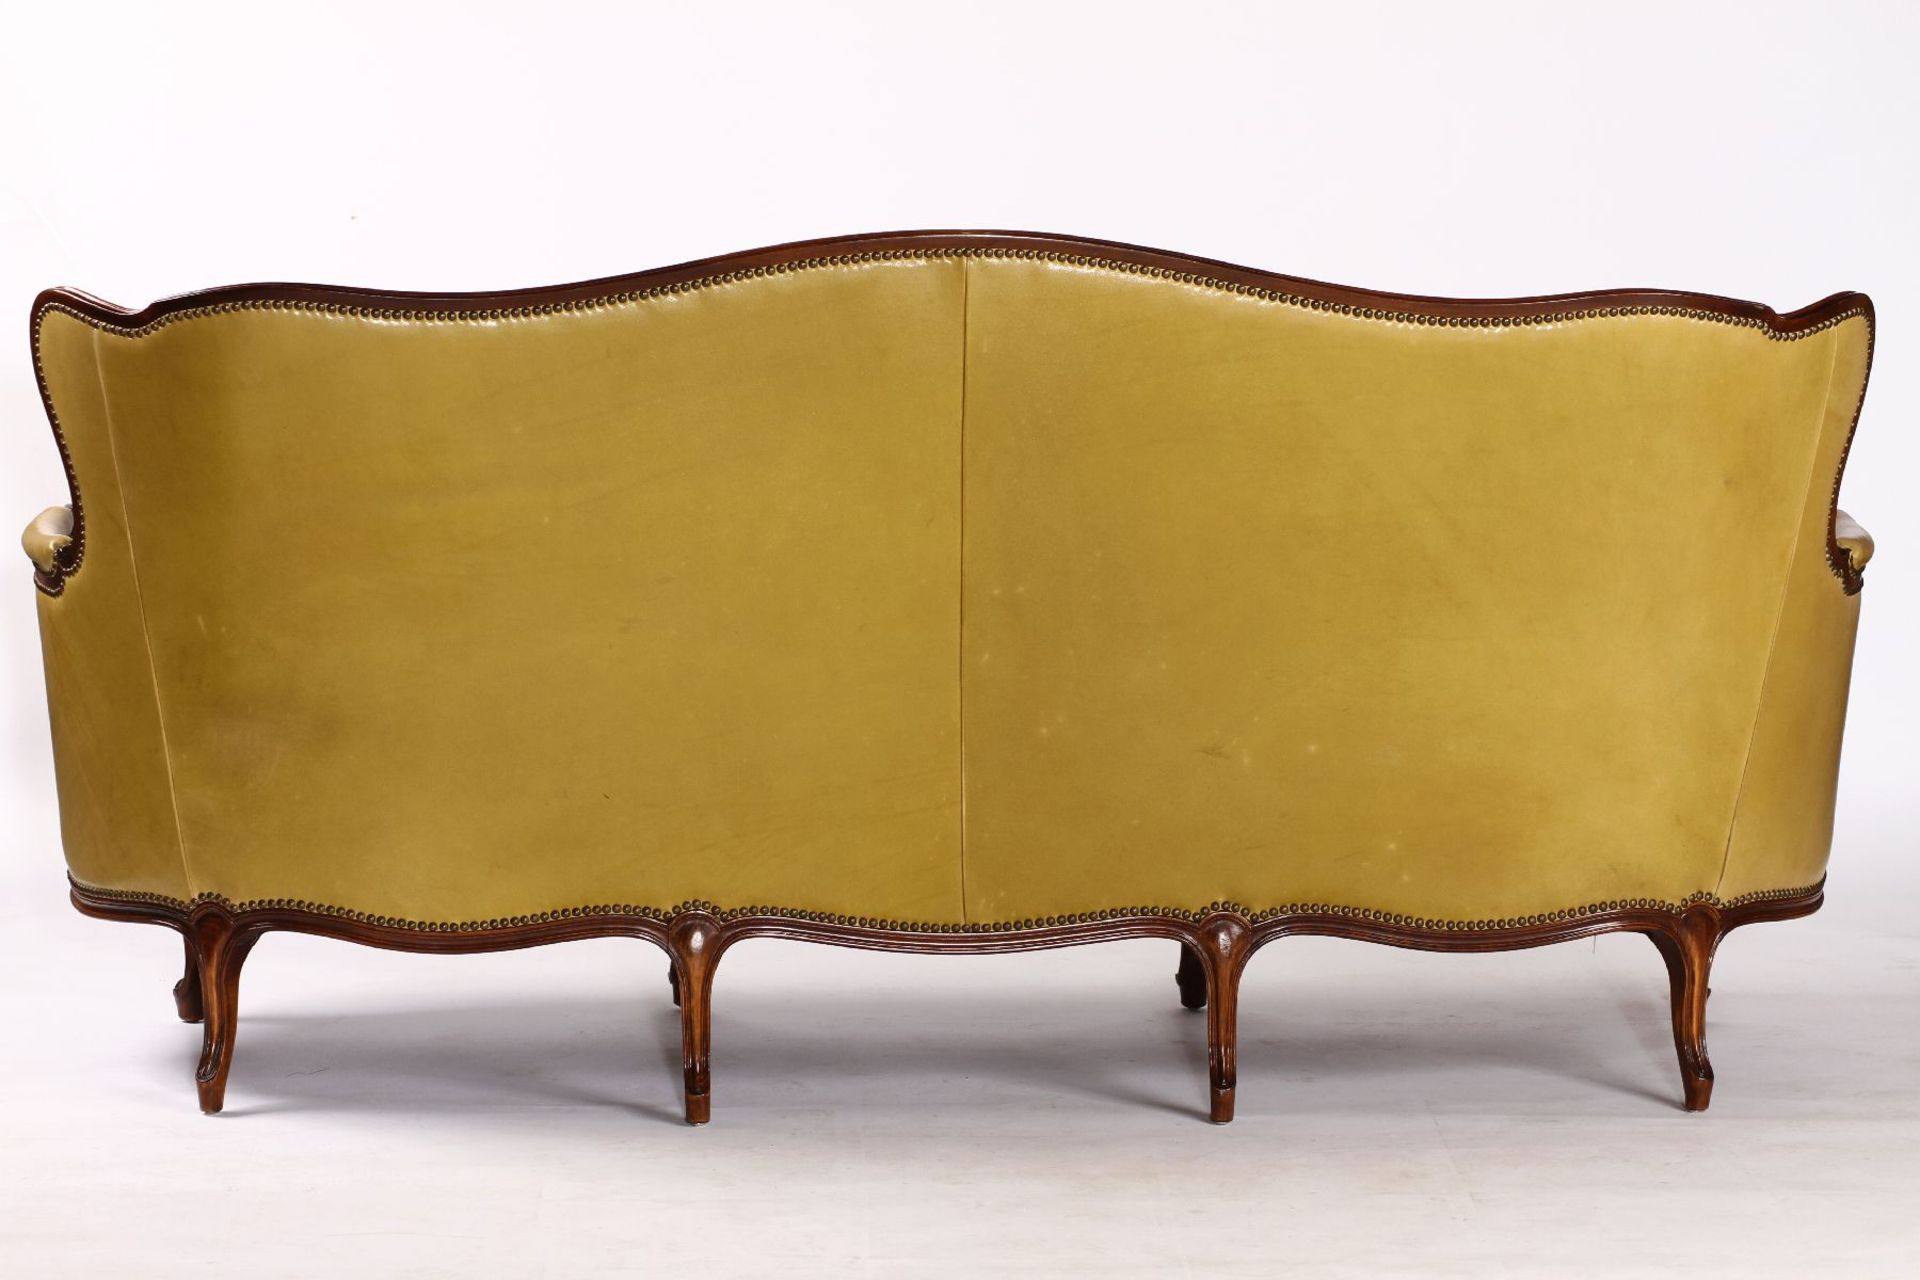 3-seater couch, solid walnut frame, yellow- green or olive leather upholstery, backrest and seat - Image 3 of 4